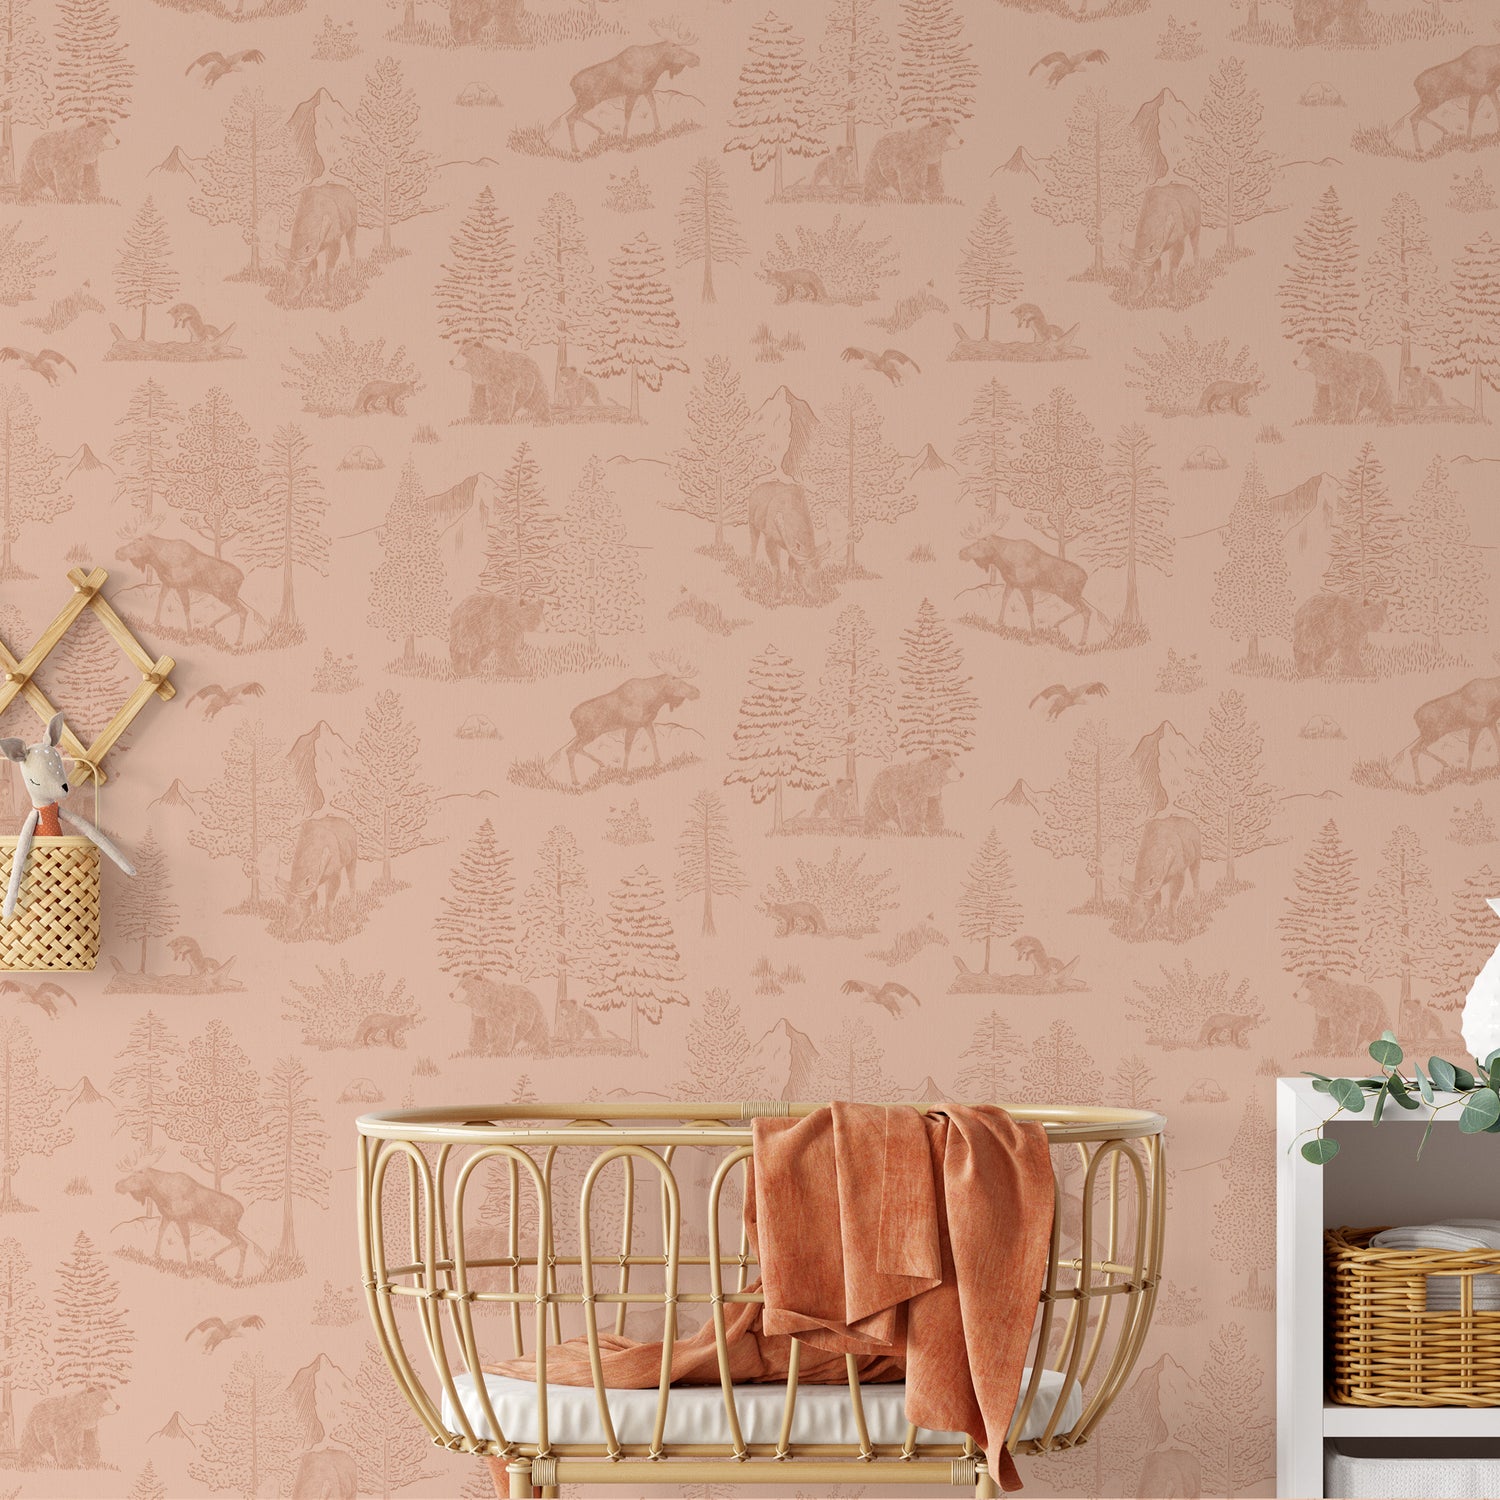 Bedroom featuring Cayla Naylor Denali- Blush Peel and Stick Wallpaper - a nature inspired pattern